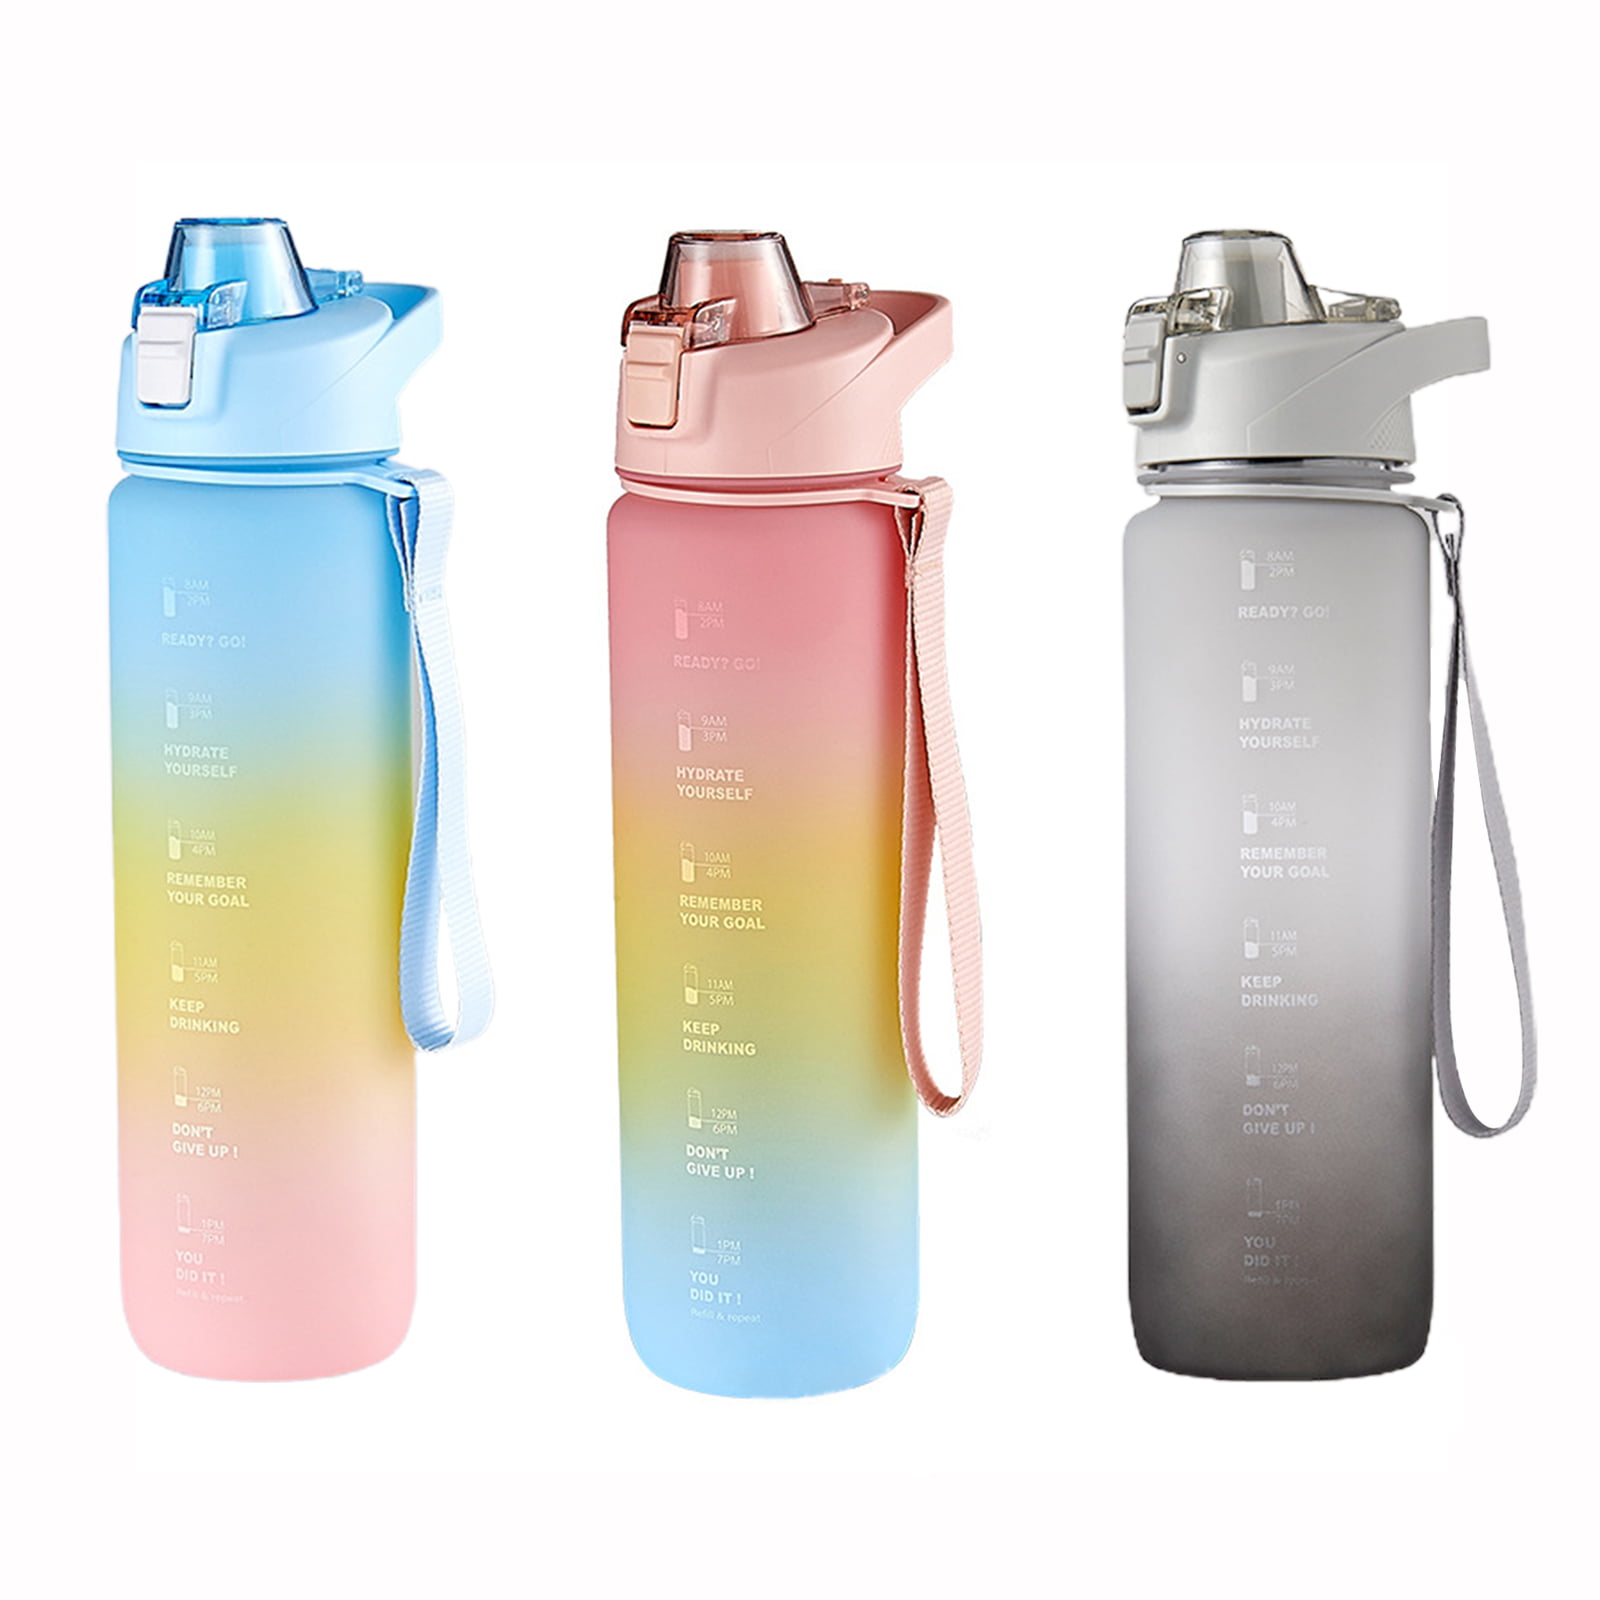 NEW HiDR8 85 Oz Motivational Sports Bottle BPA Free Stay Hydrated PINK